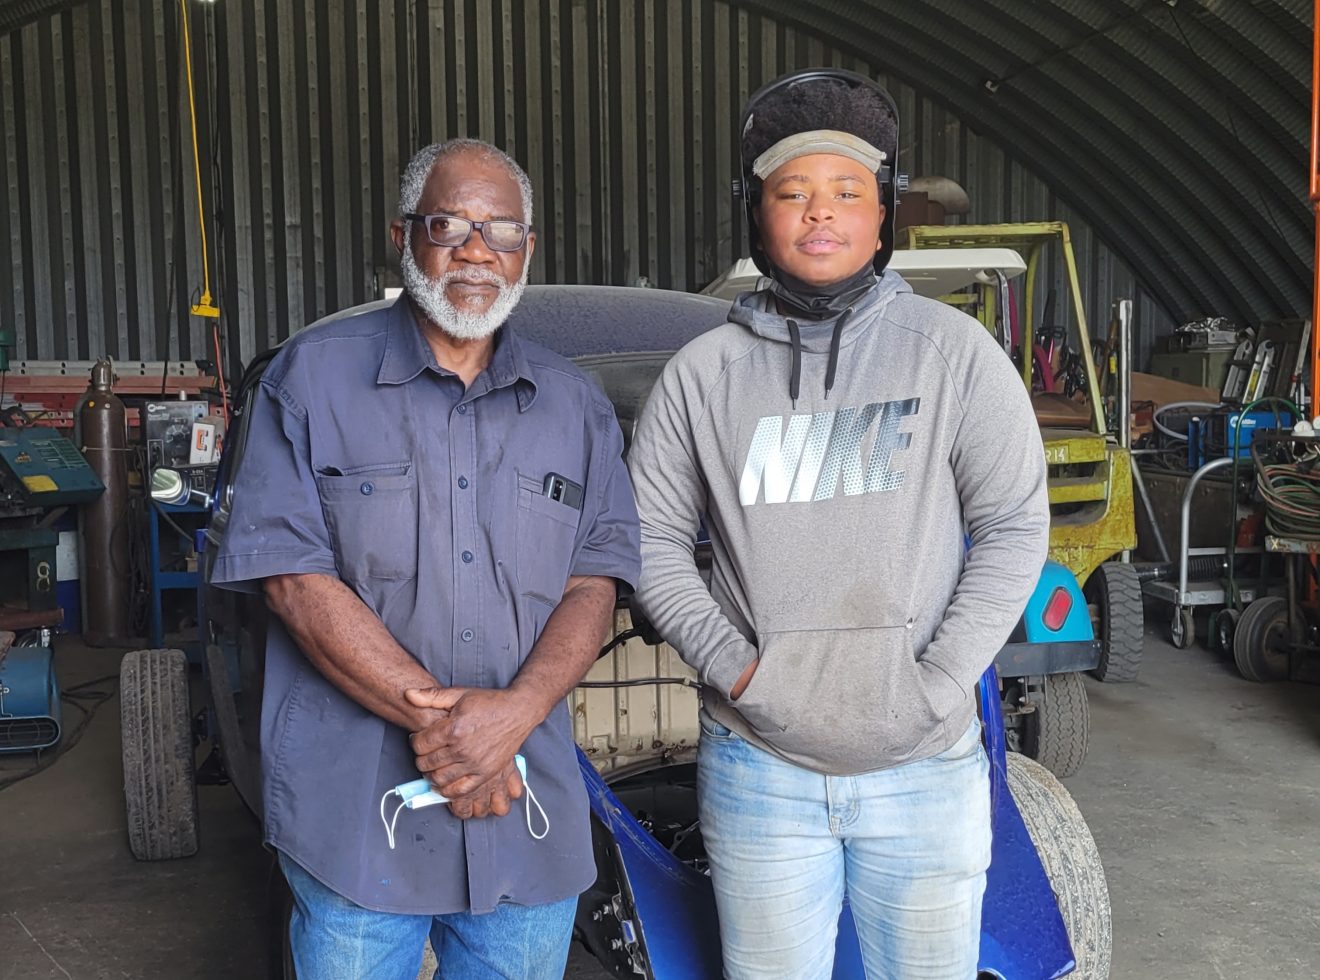 Jacobi and their mentor in the workshop